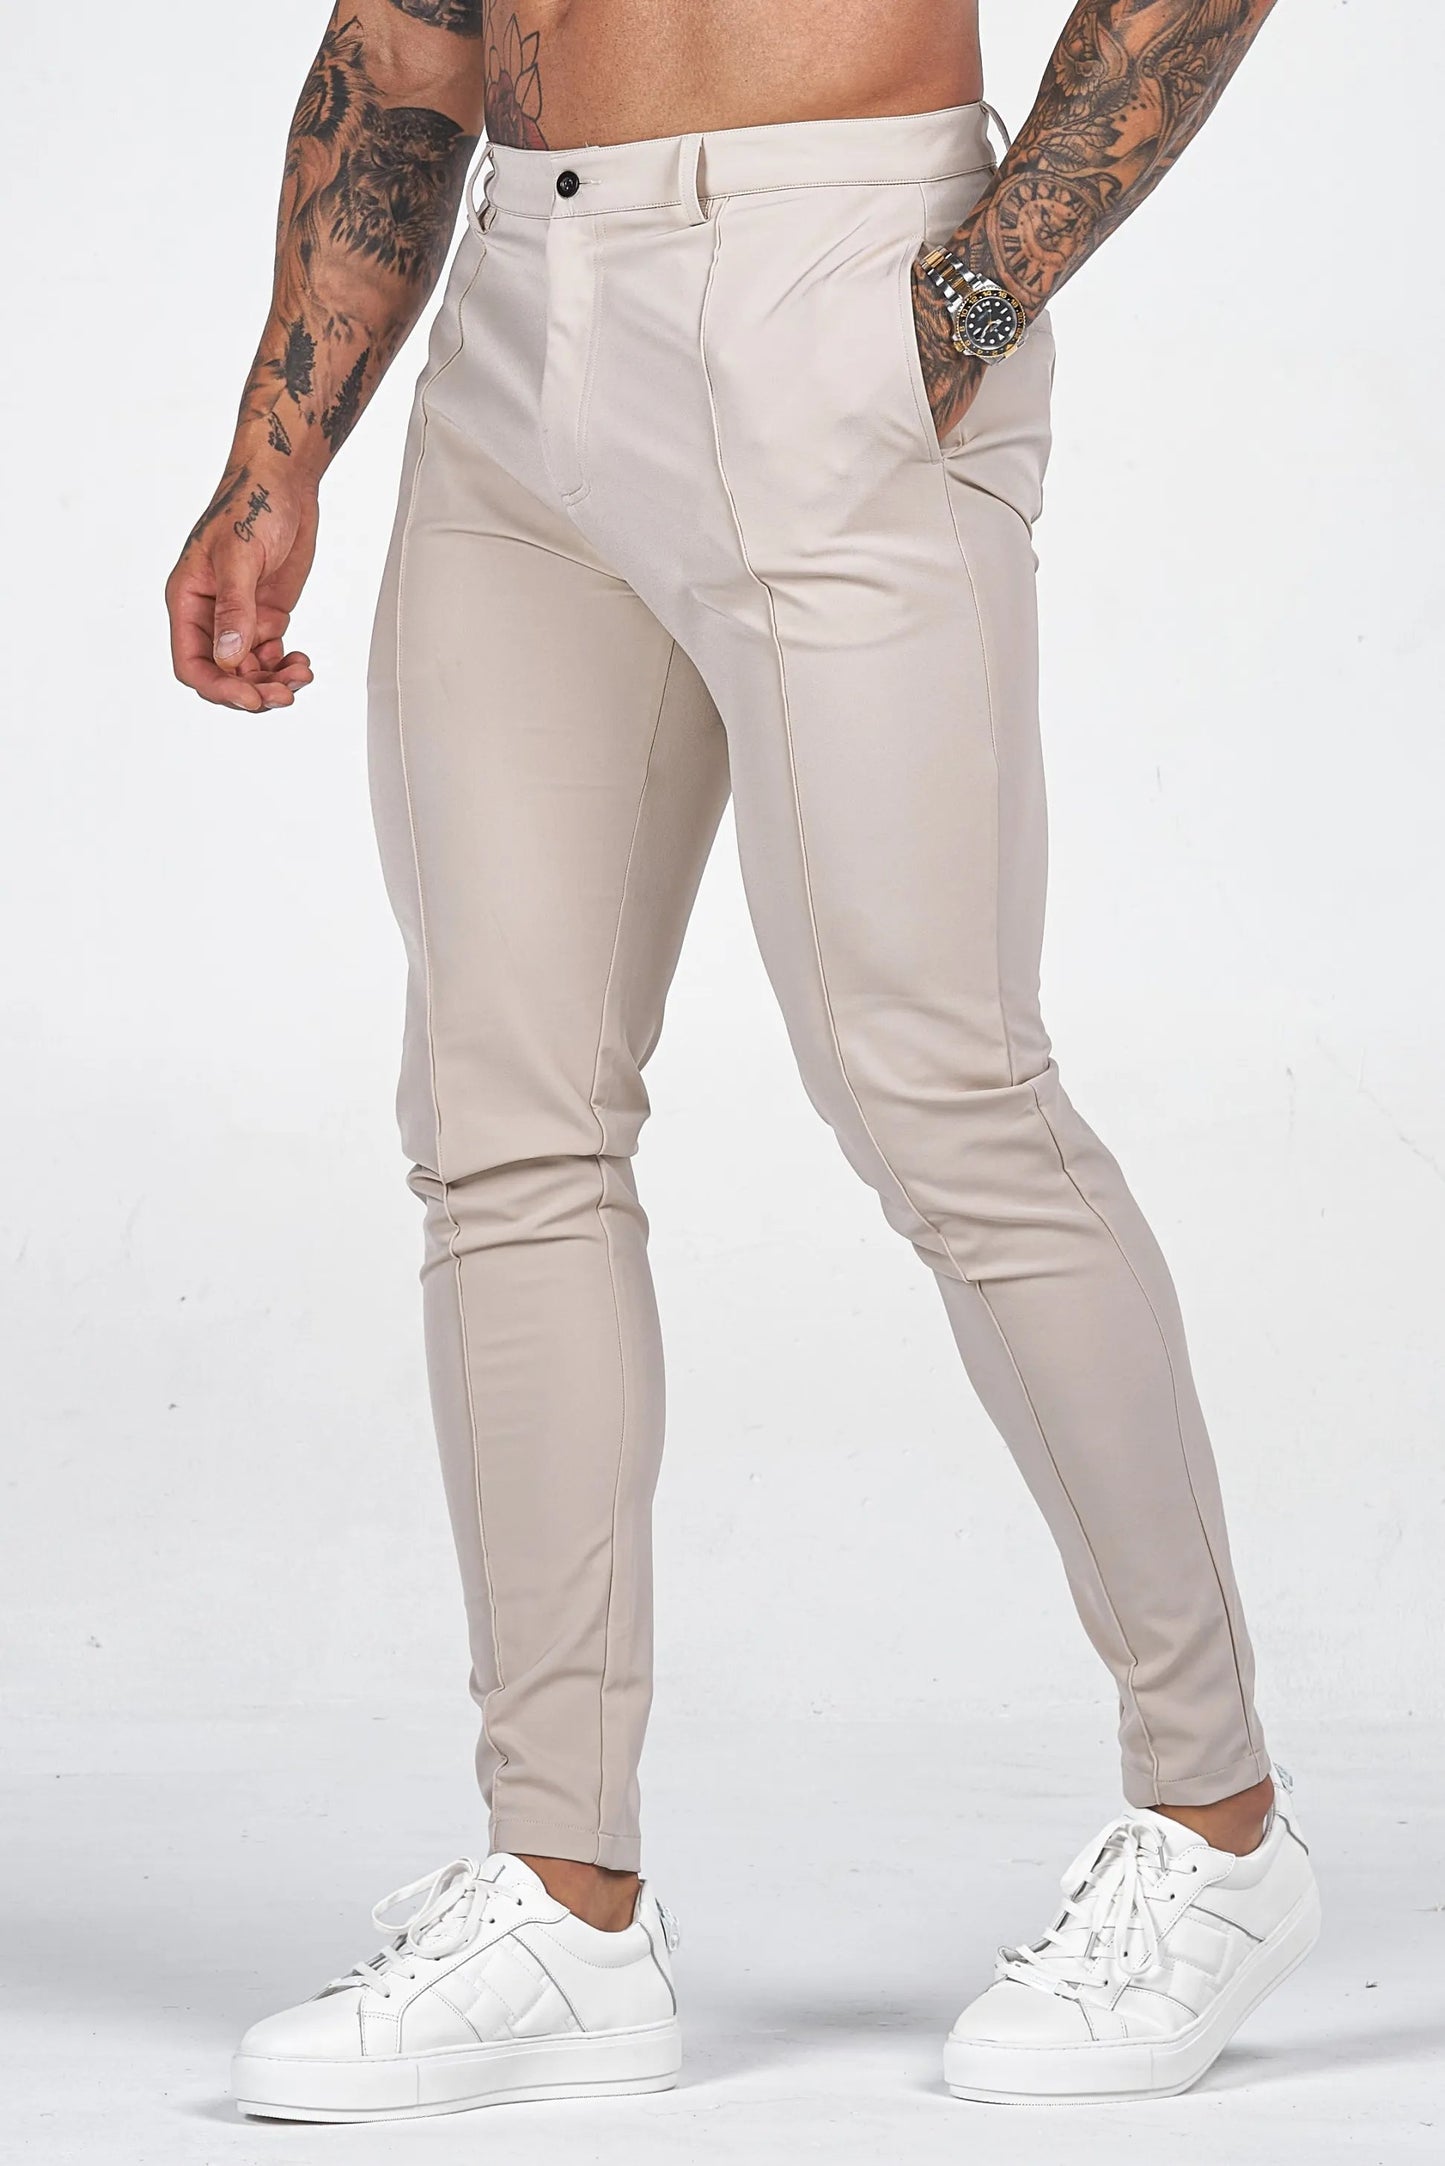 Men's casual trousers (free shipping if you buy 2 pairs)